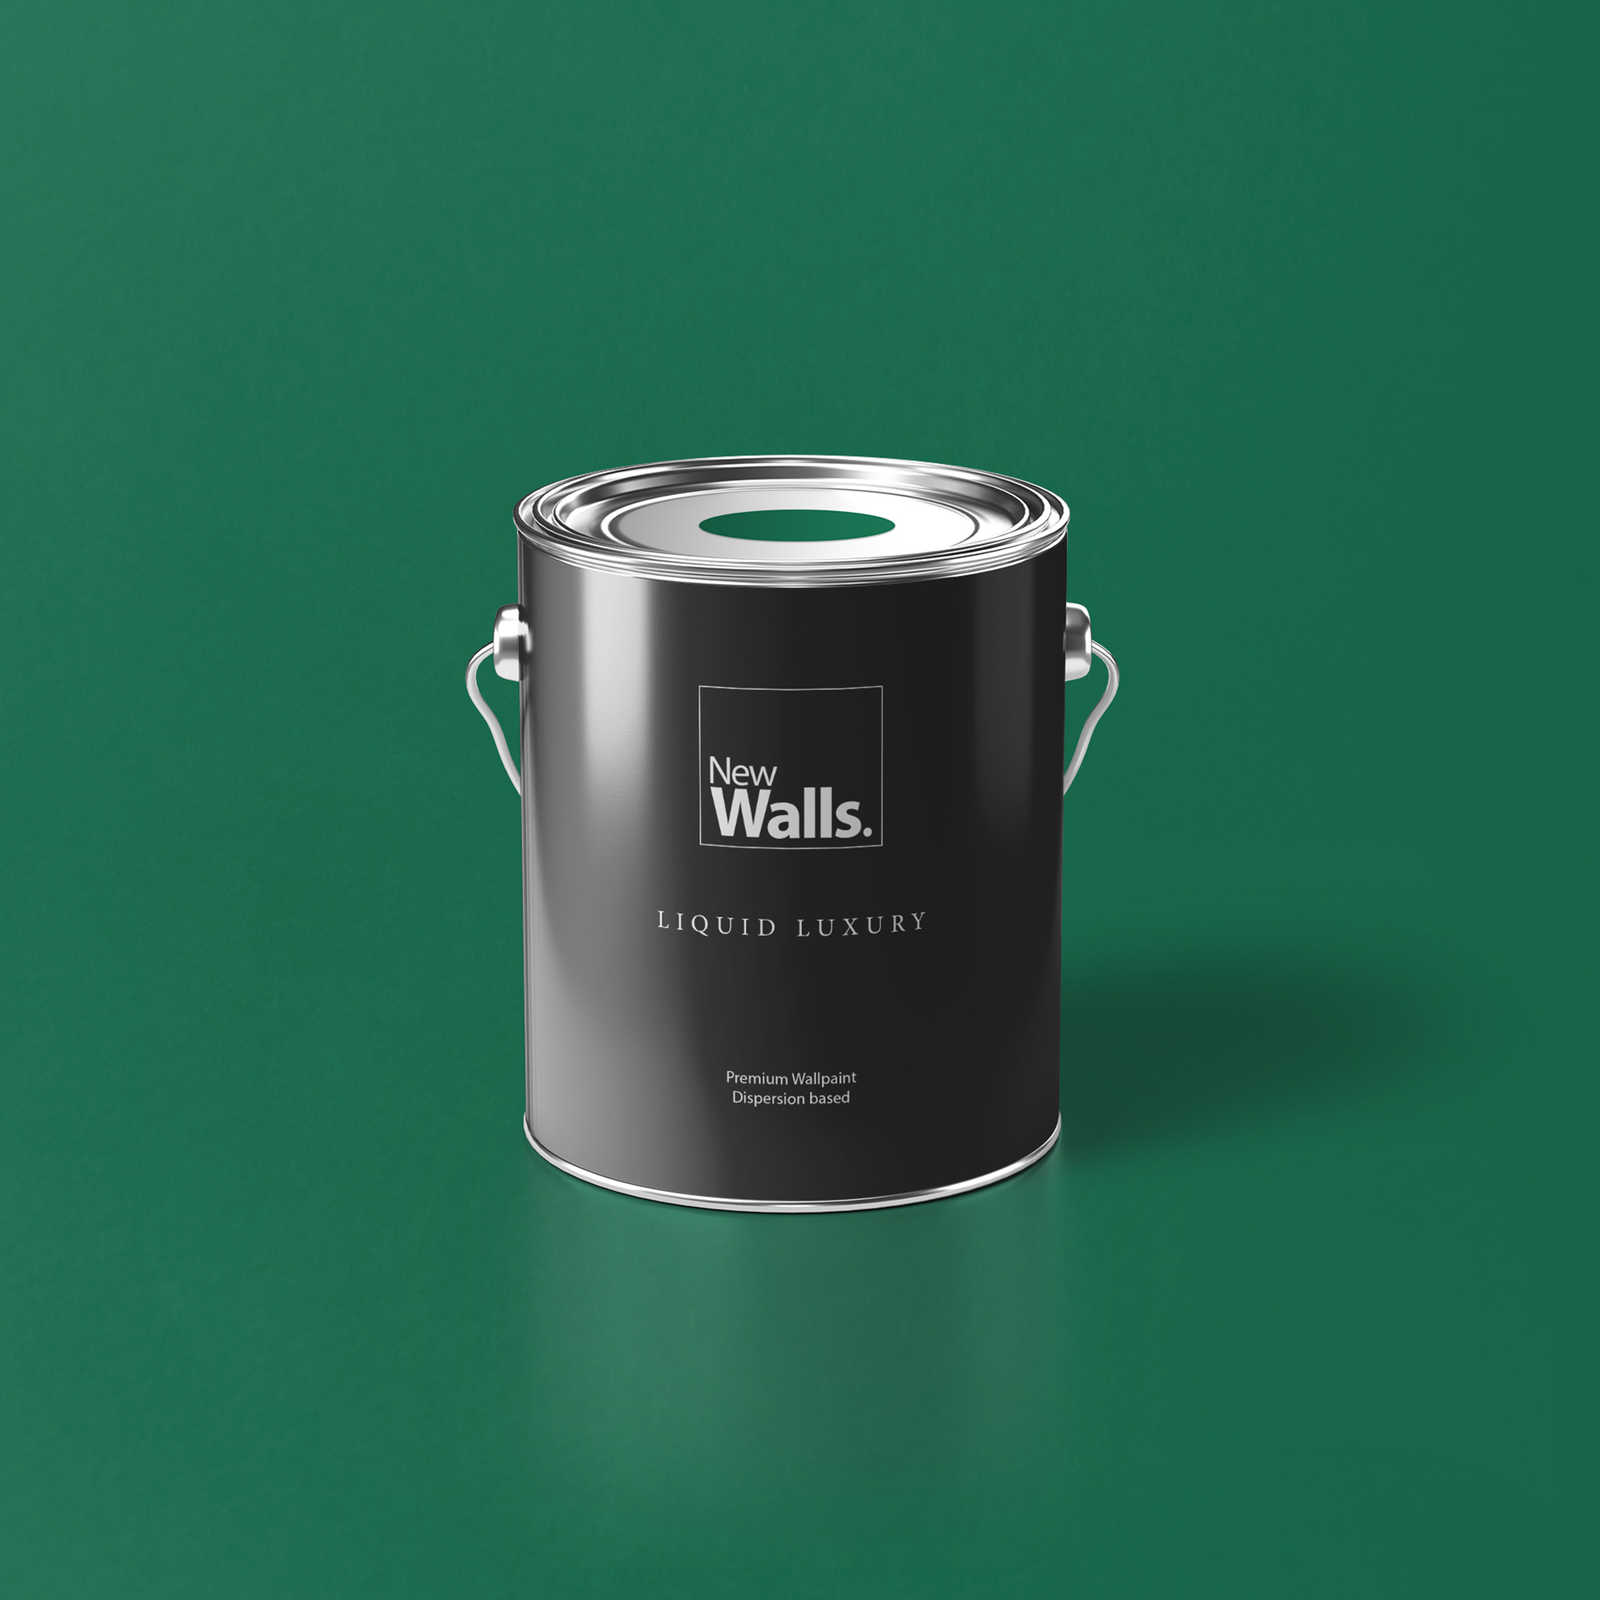 Premium Wall Paint Nature Bottle Green »Gorgeous Green« NW500 – 2.5 litre
